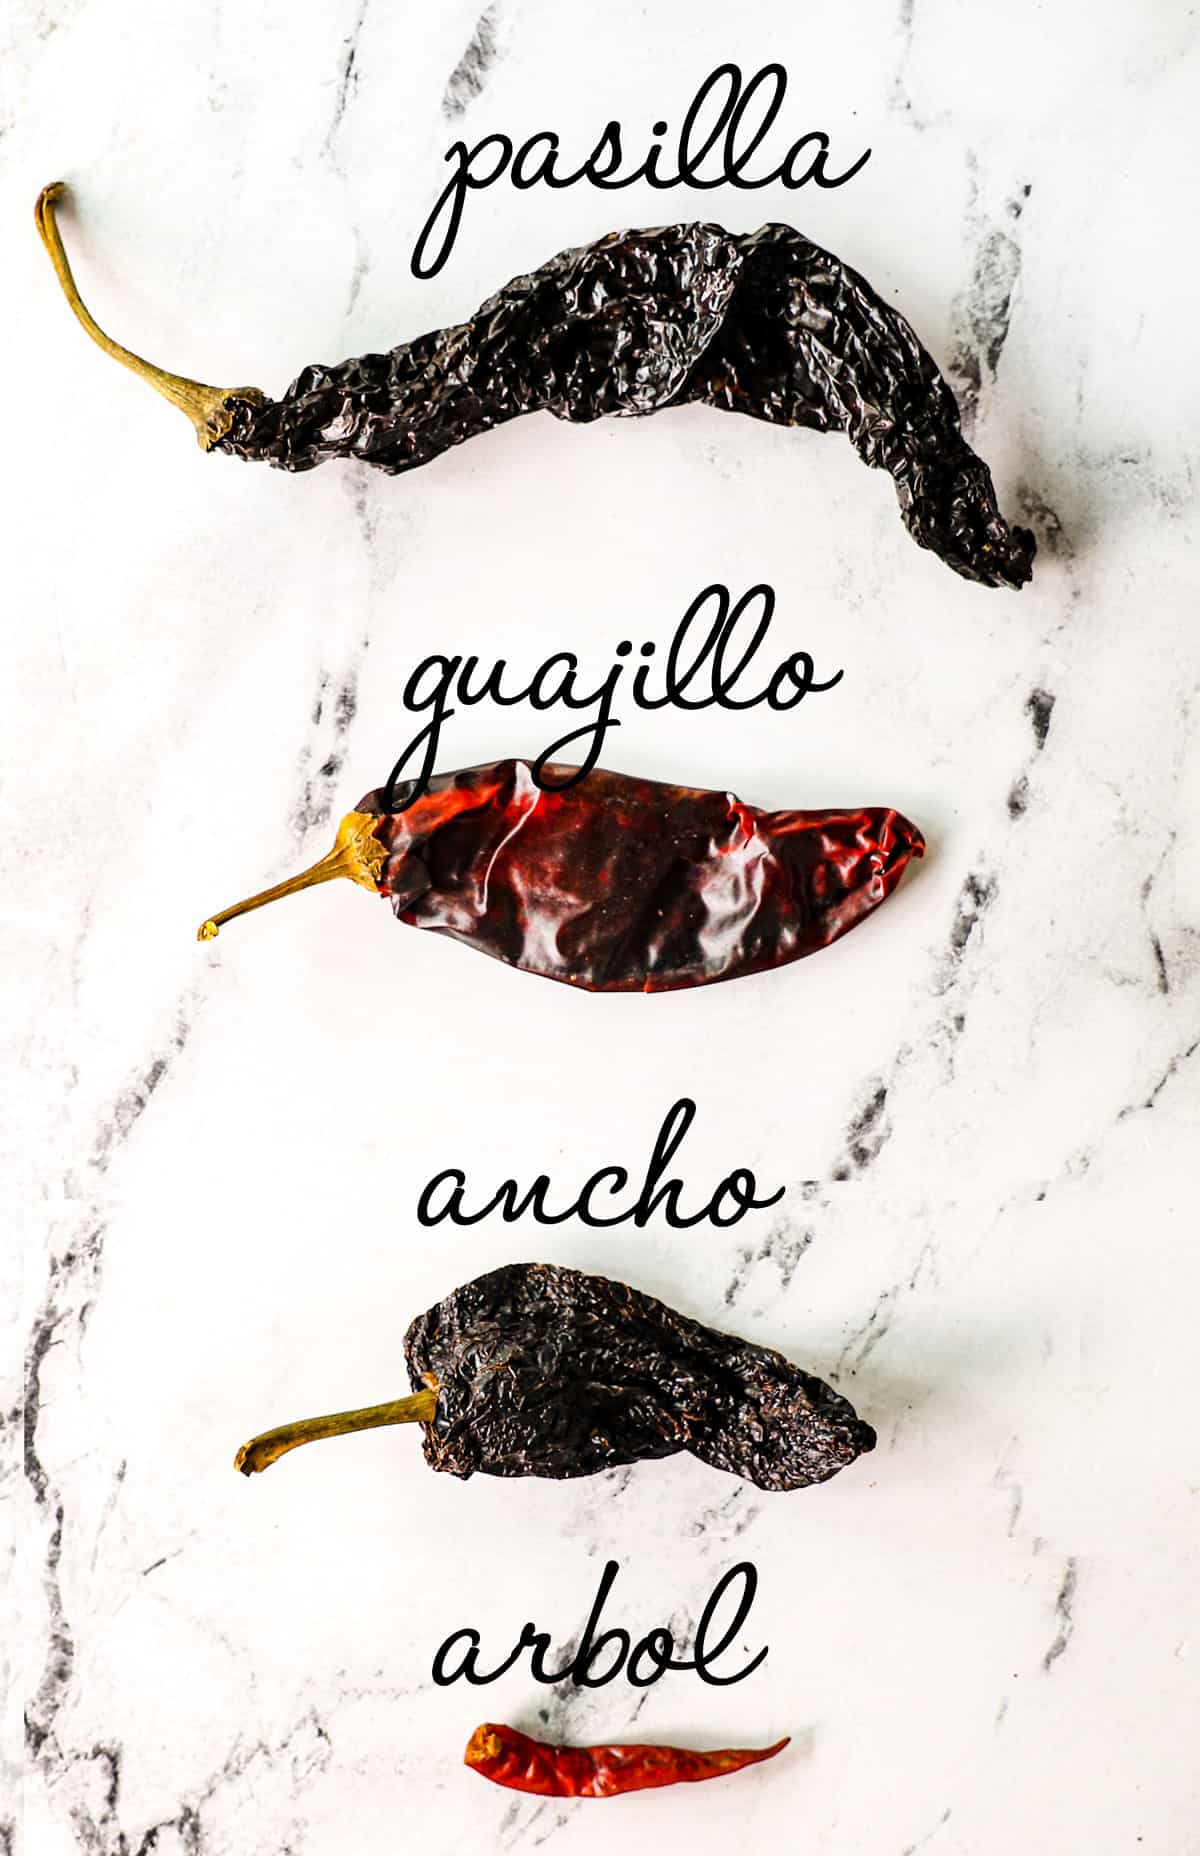 showing how to make mole sauce with a chart of the different dried chilies used in the recipe  - pasilla chilies, guajillo chilies, ancho chilies and chilies de arbol